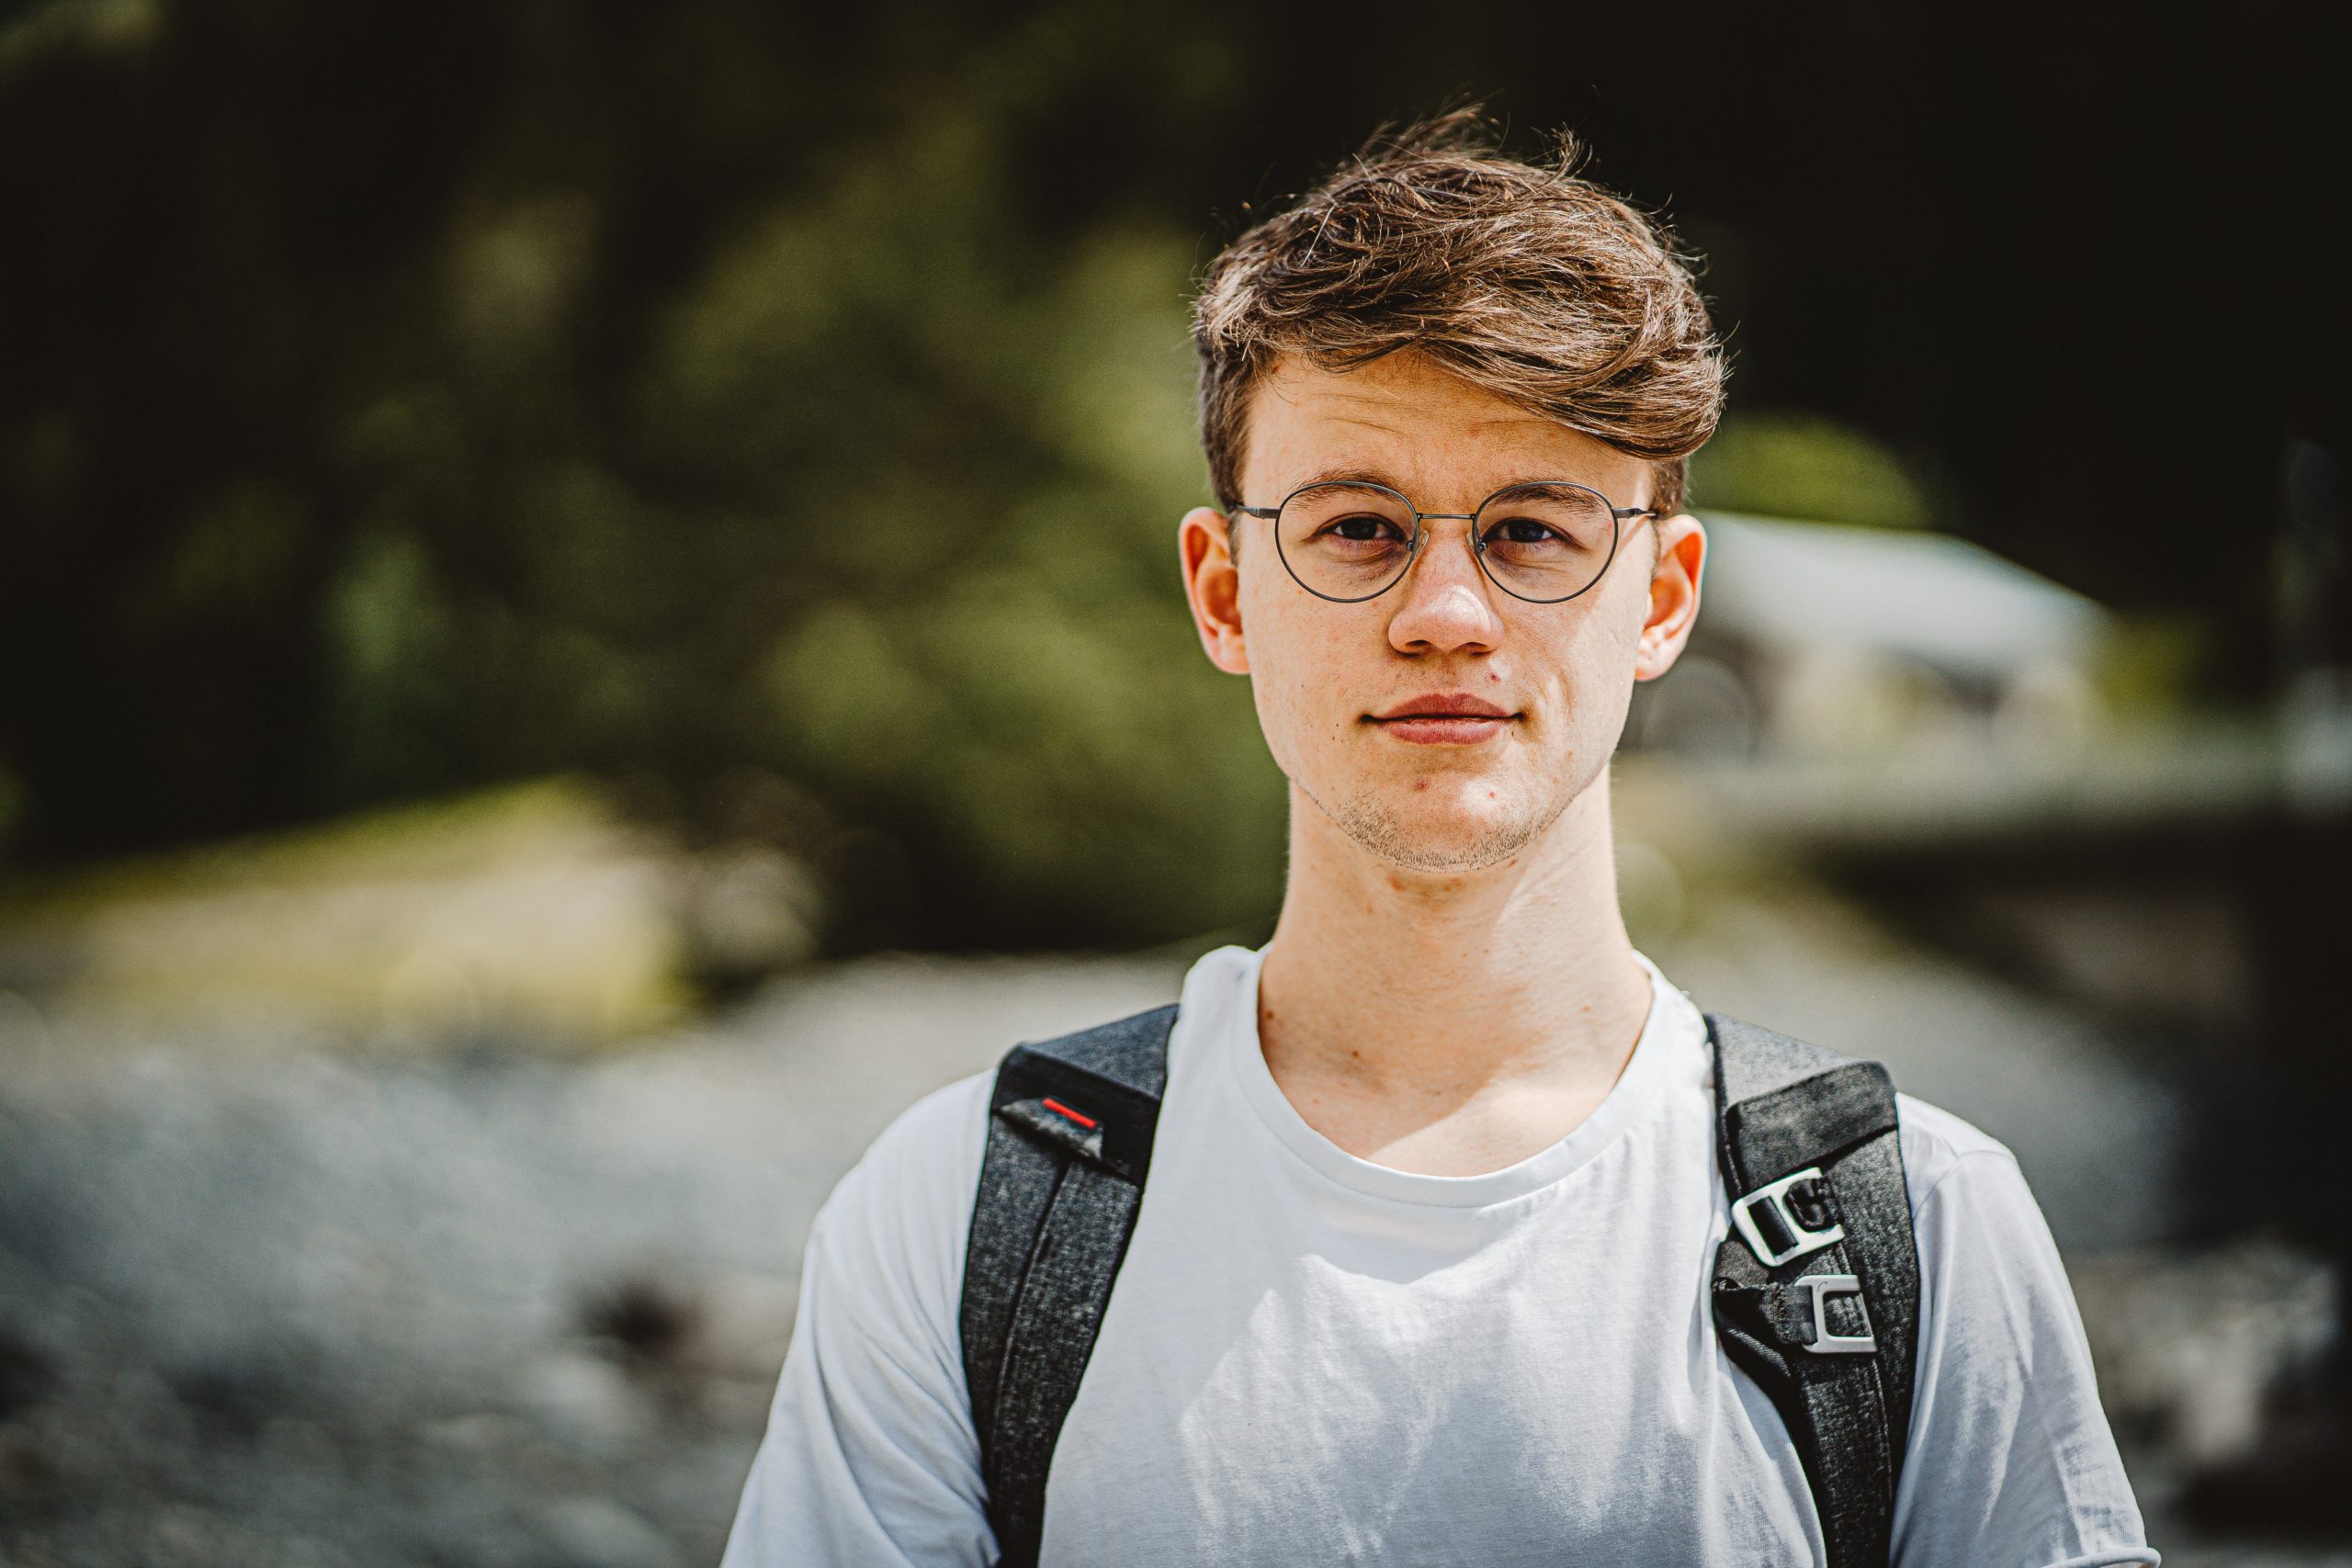 Teenage boy wearing glasses and backpack smiling at camera